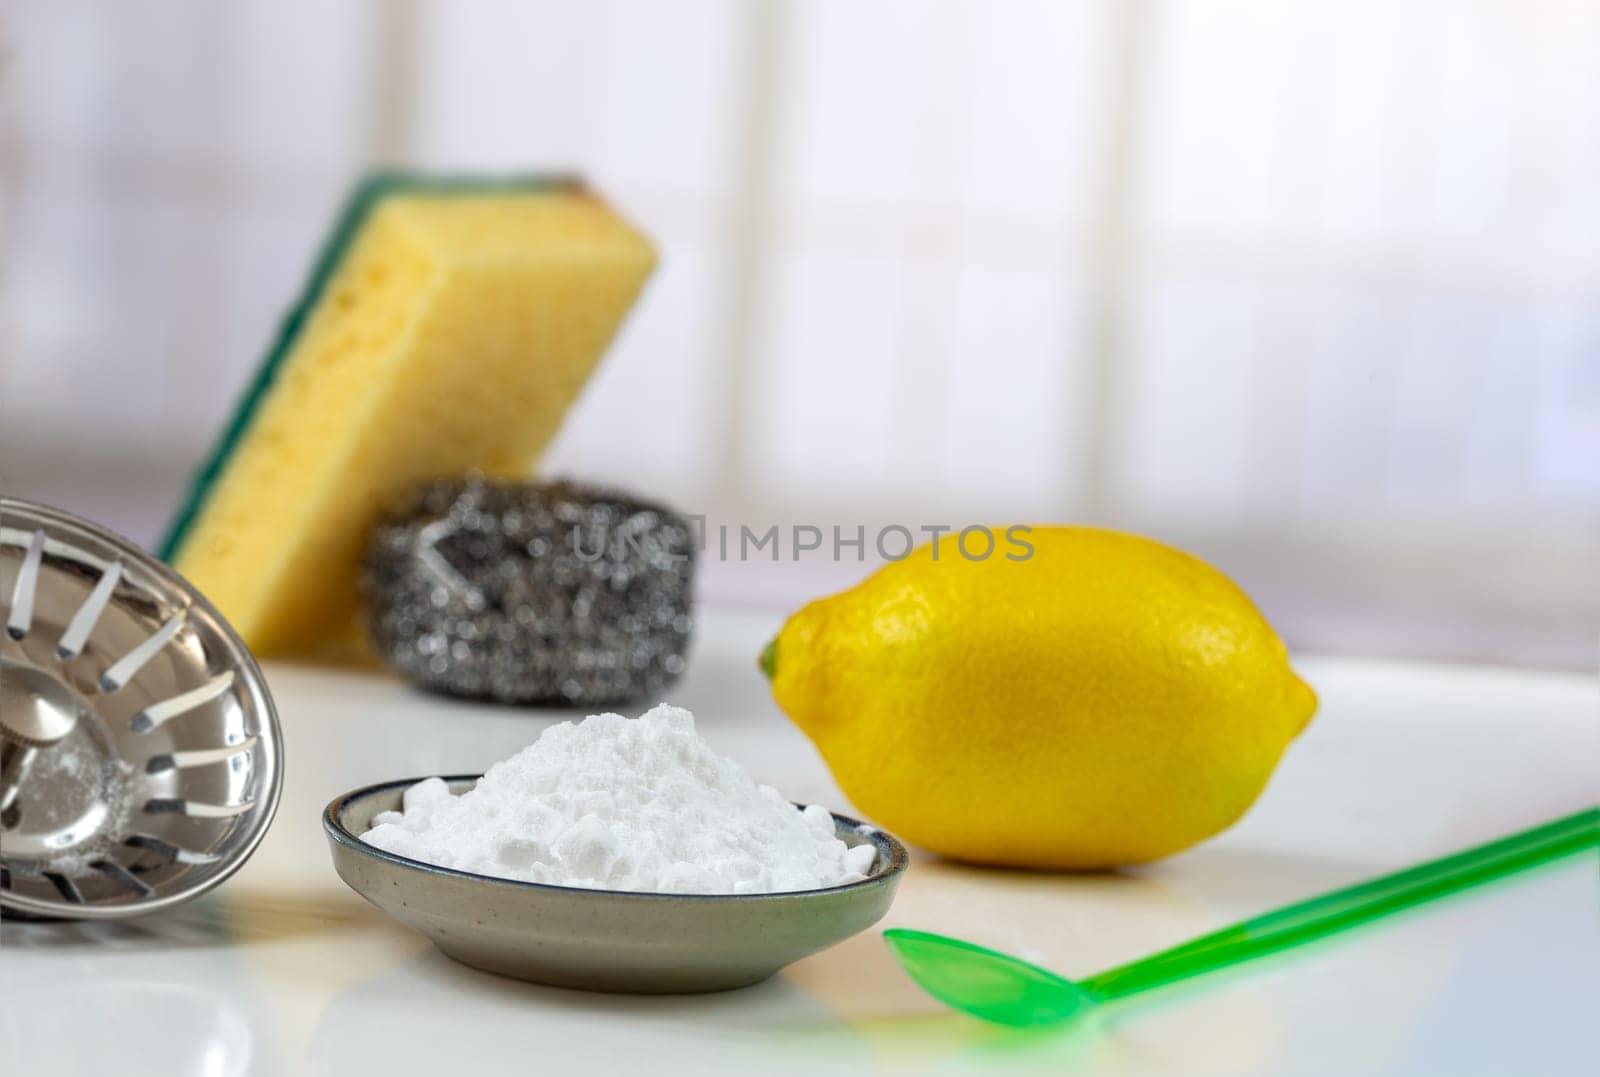 Baking soda, vinegar and cut lemons Materiel for non toic cleaning freindly household